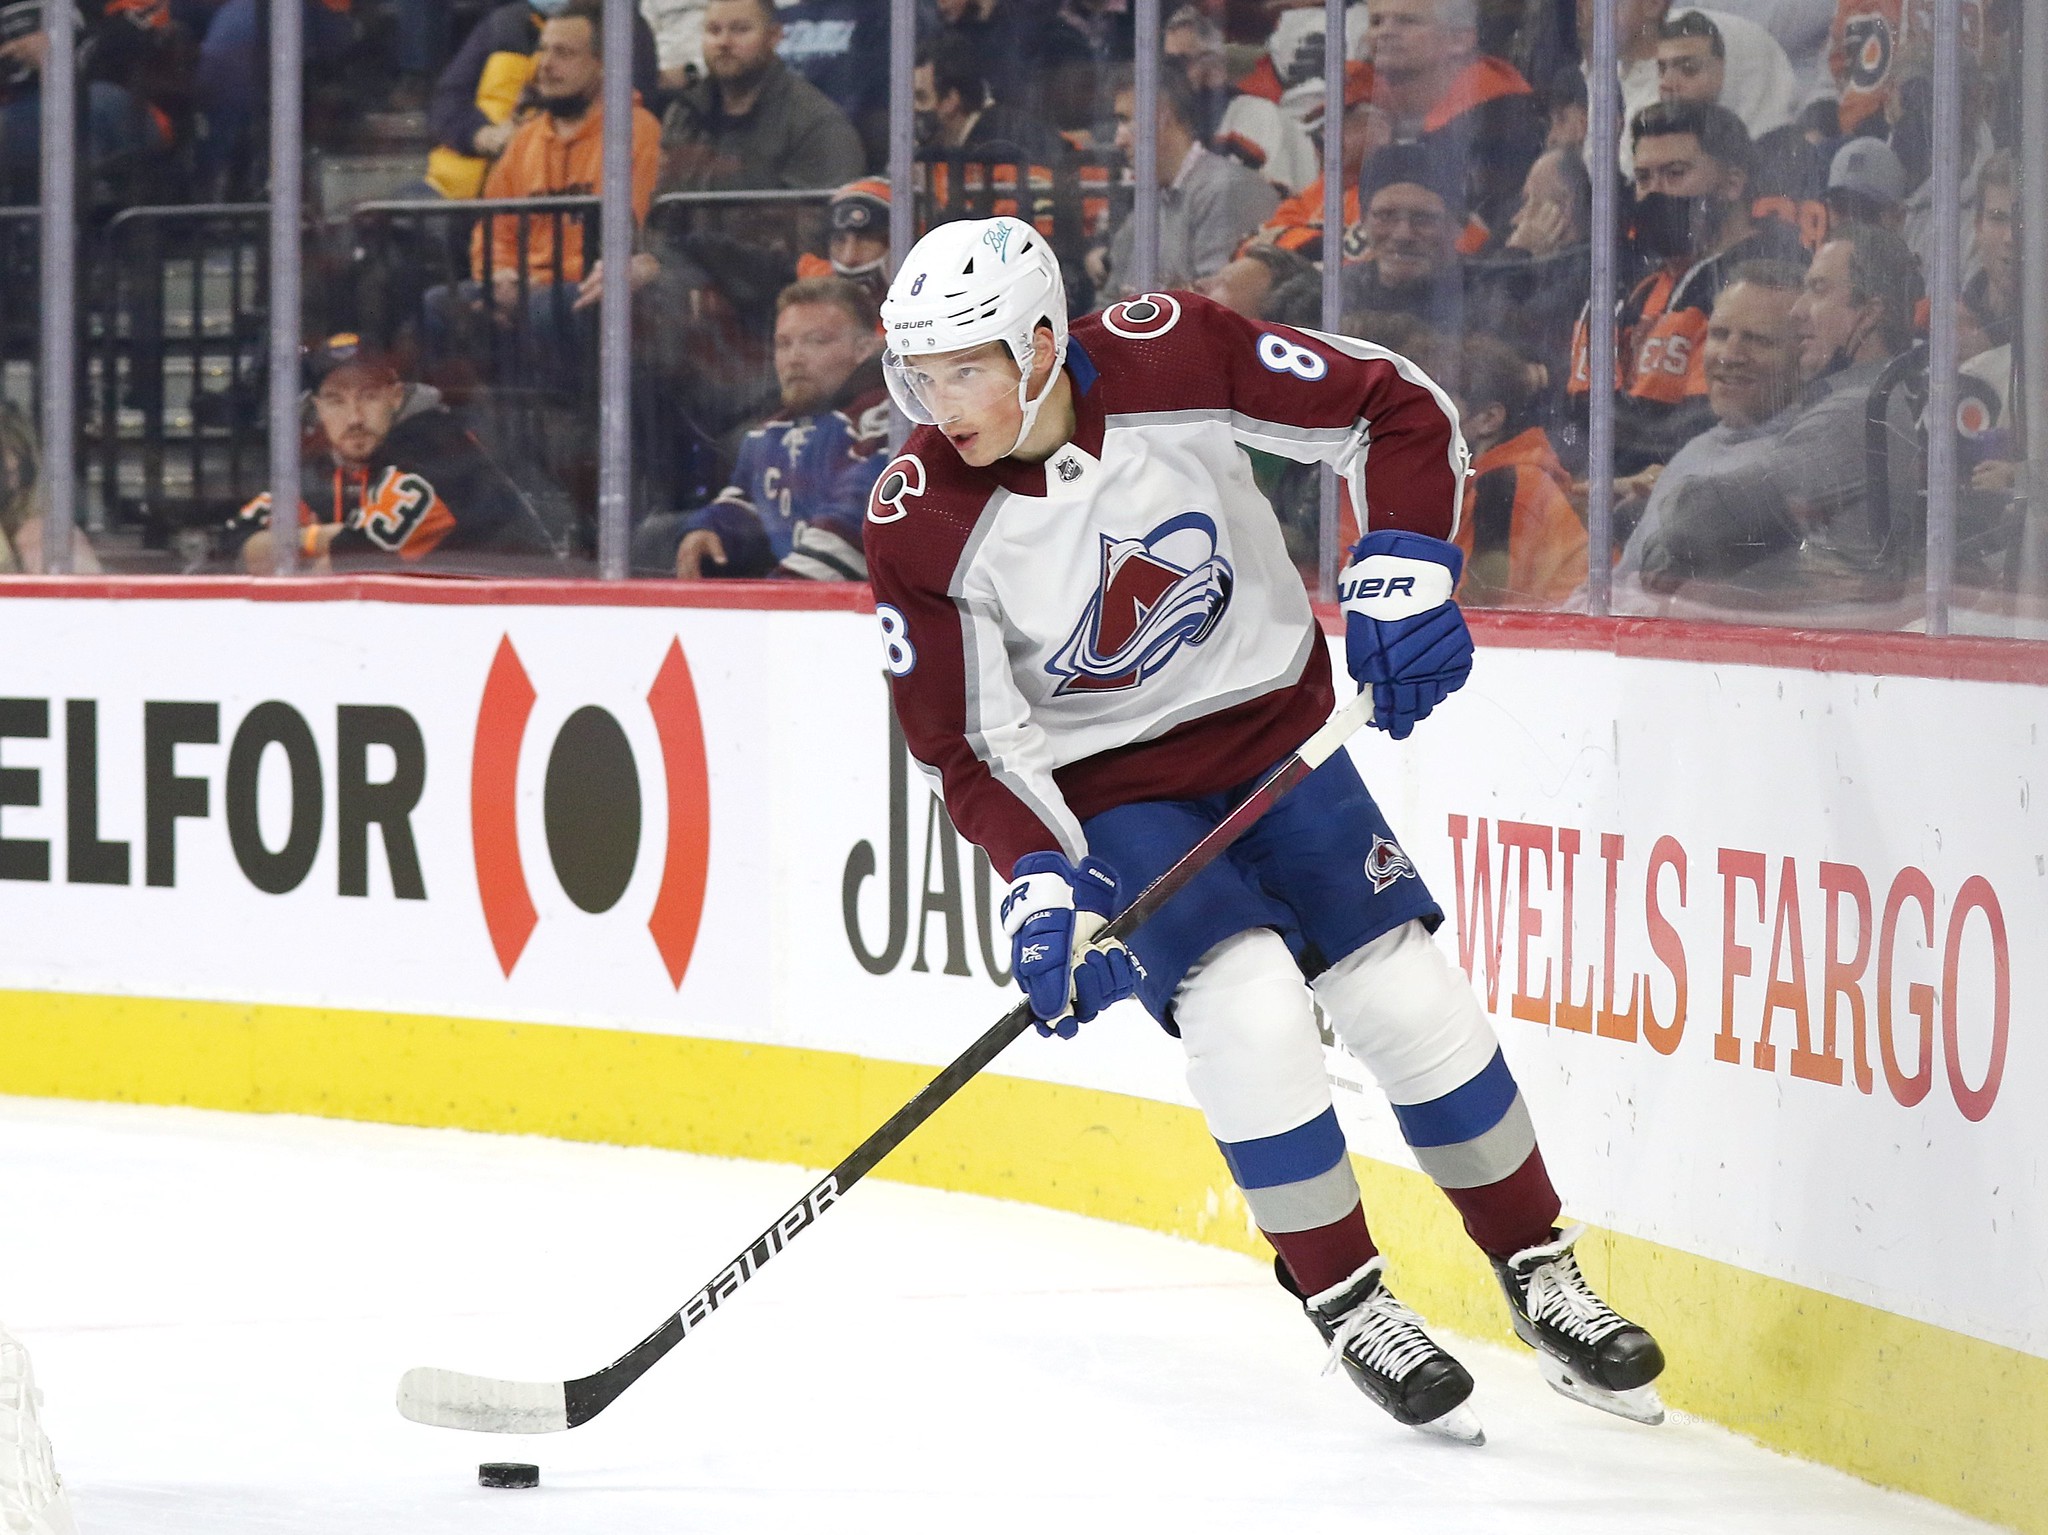 3 Takeaways from the Avalanche's 5-4 Win Over the Islanders - 3/7/22